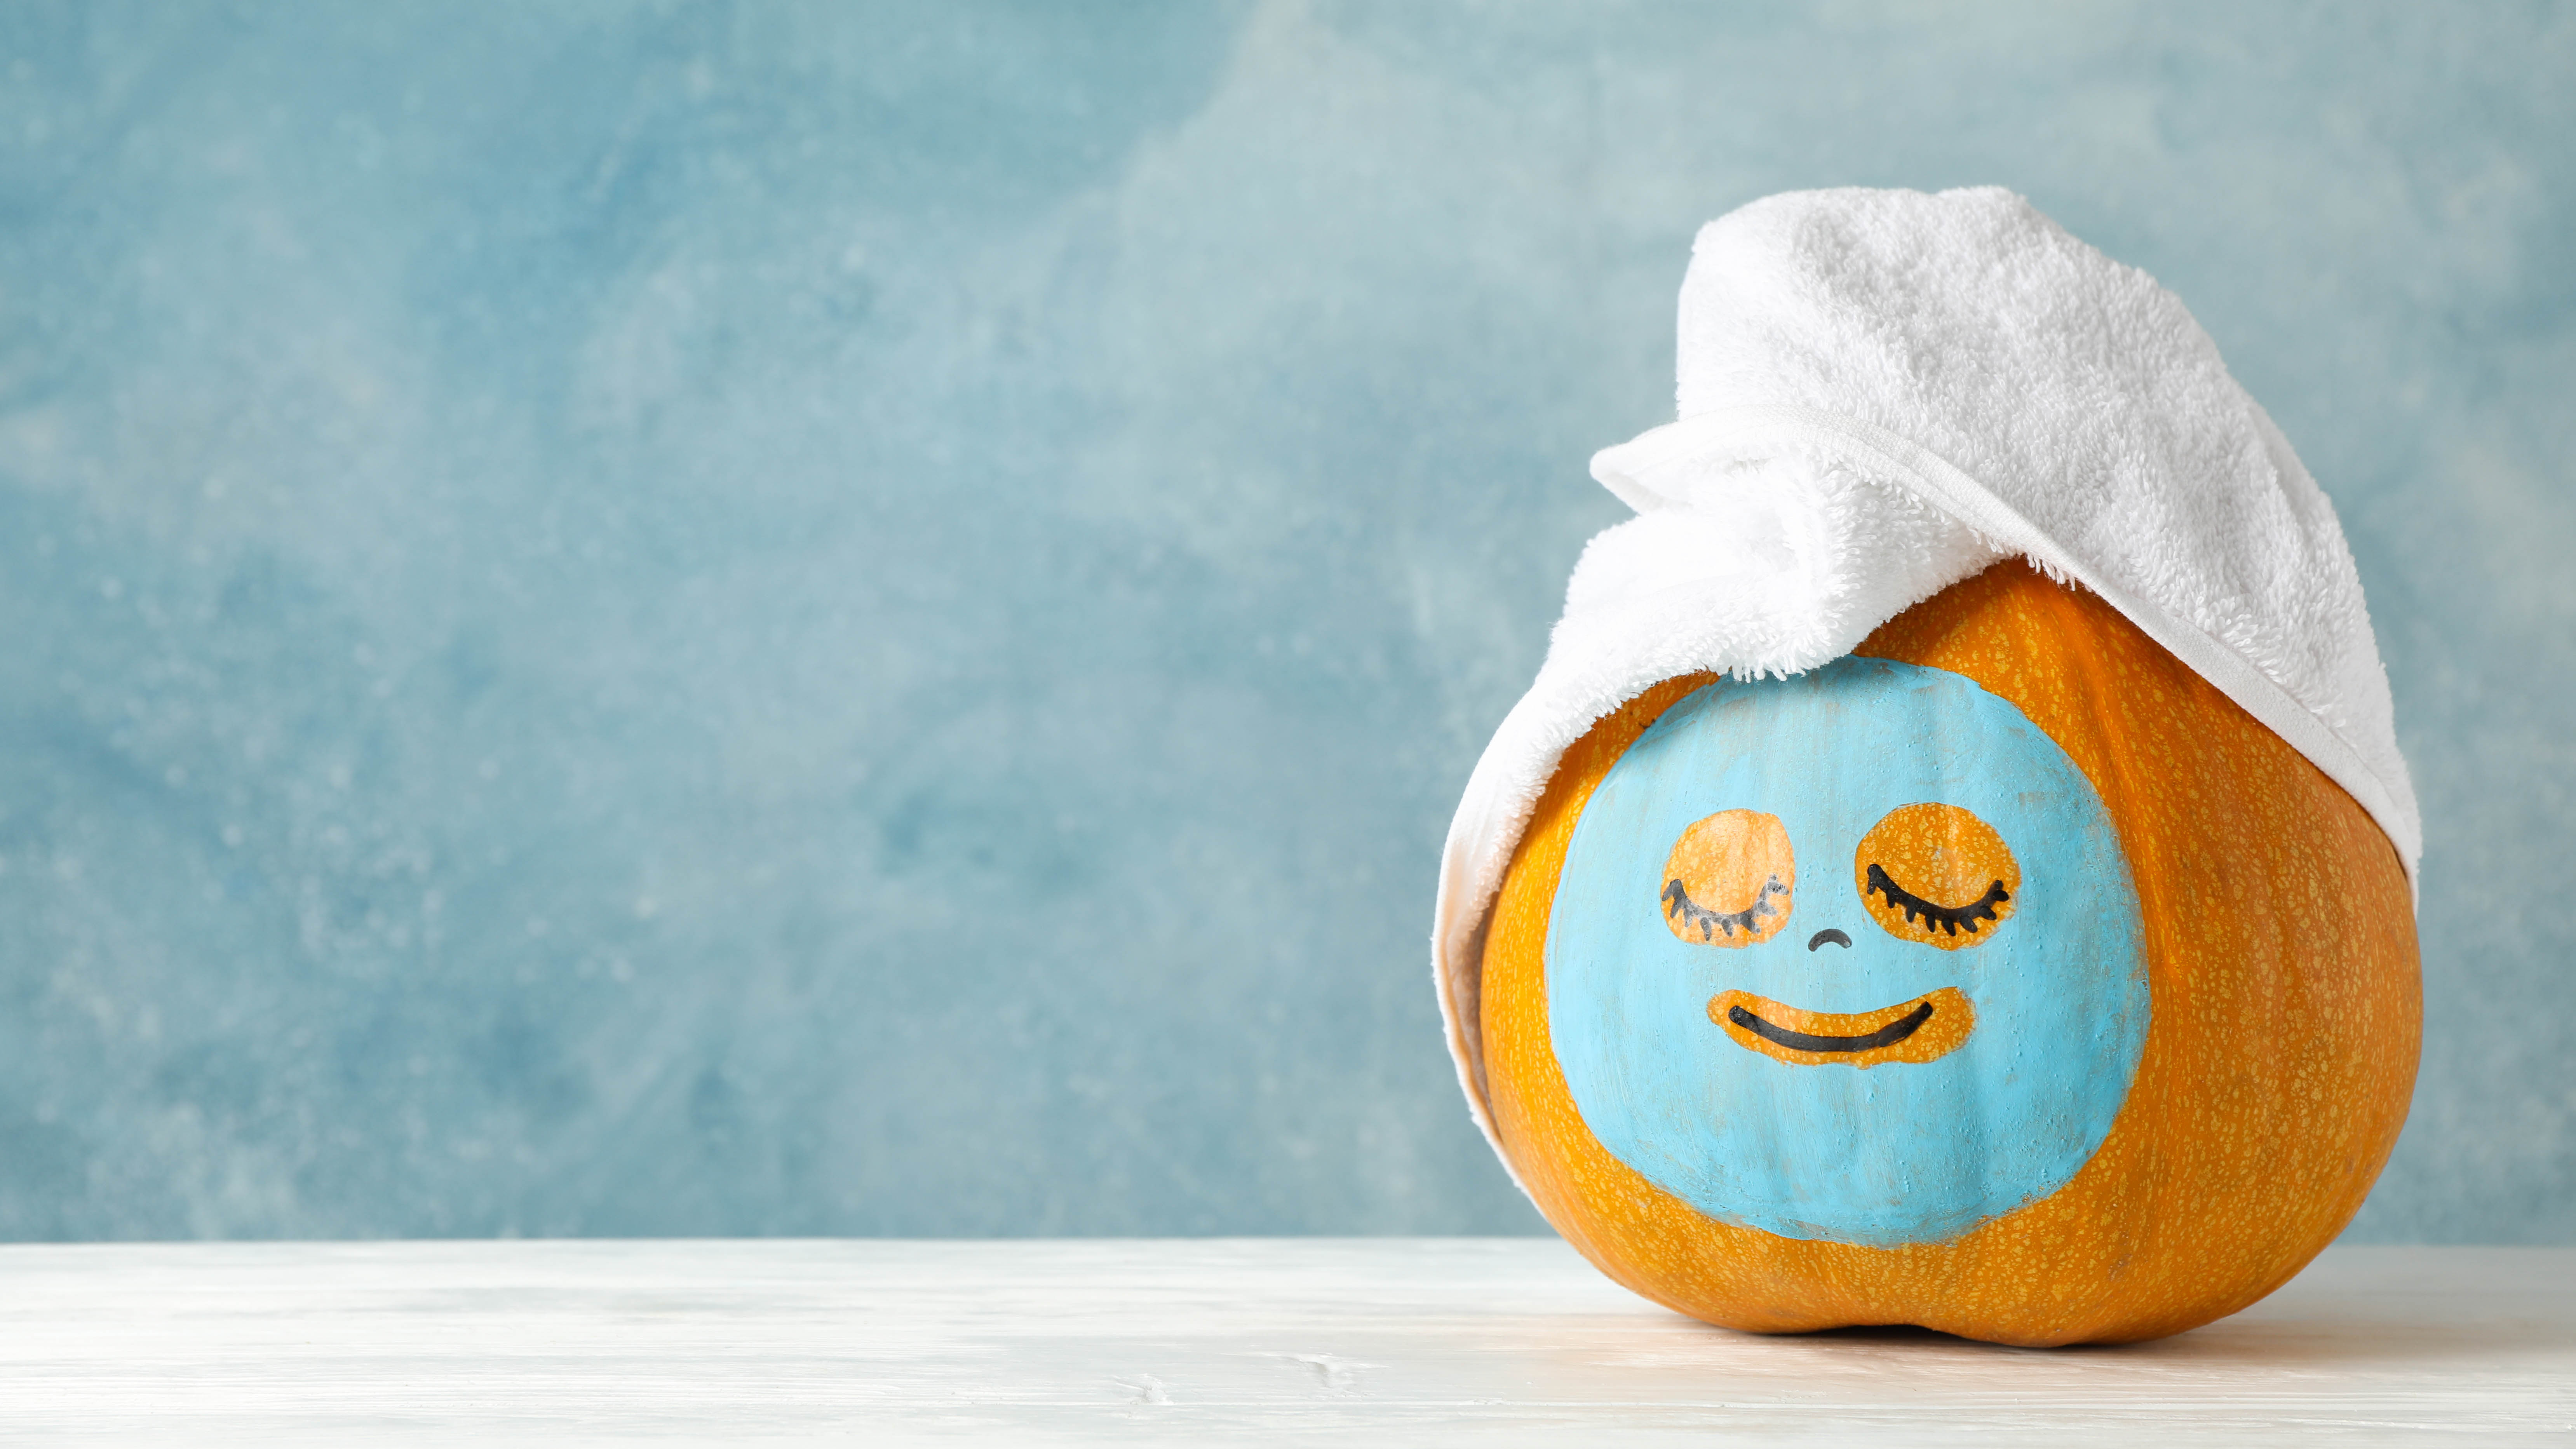 A pumpkin with a face mask drawn on wearing a towel on top